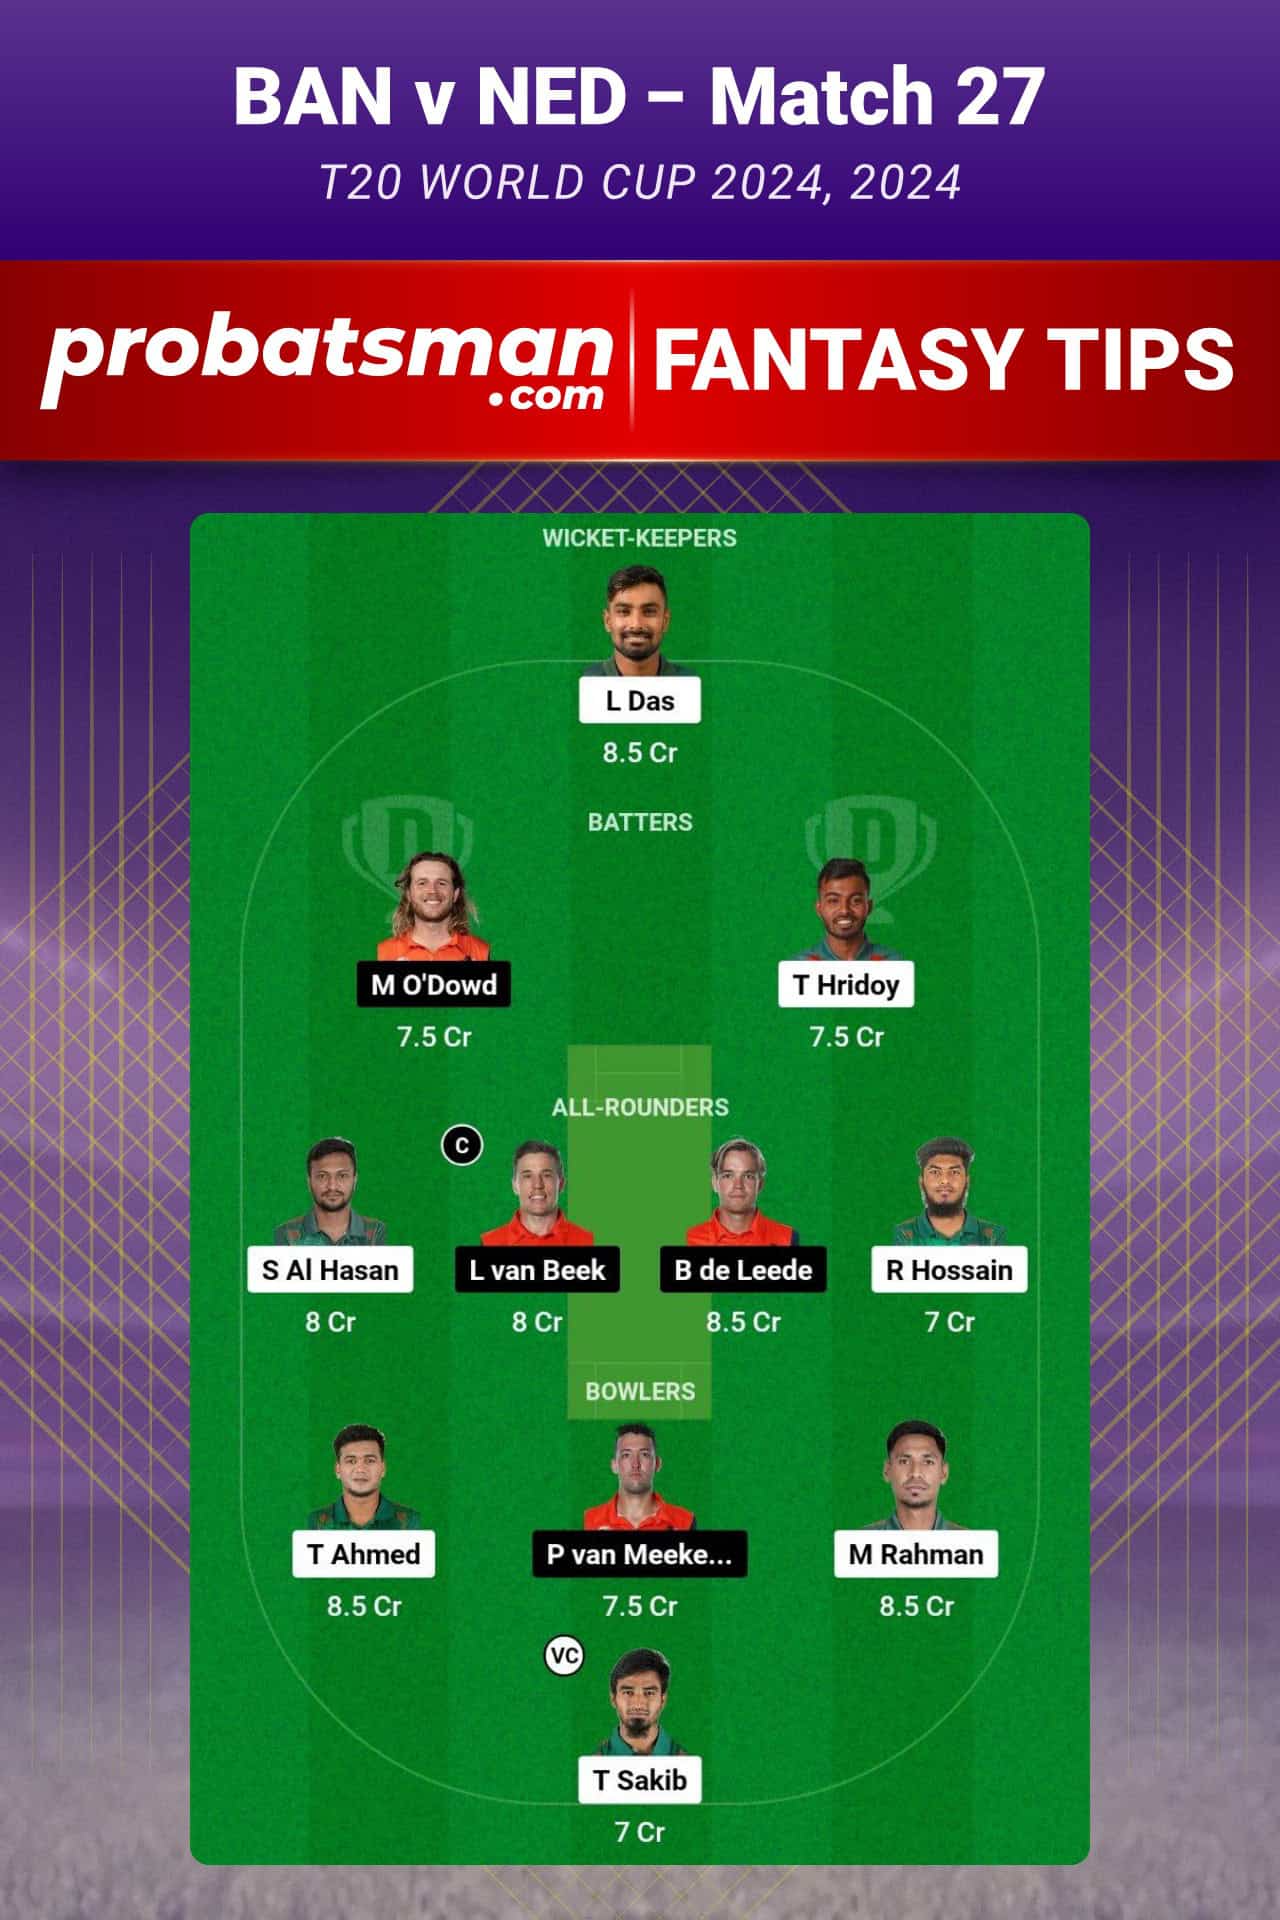 BAN vs NED Dream11 Prediction For Match 27 of T20 World Cup 2024